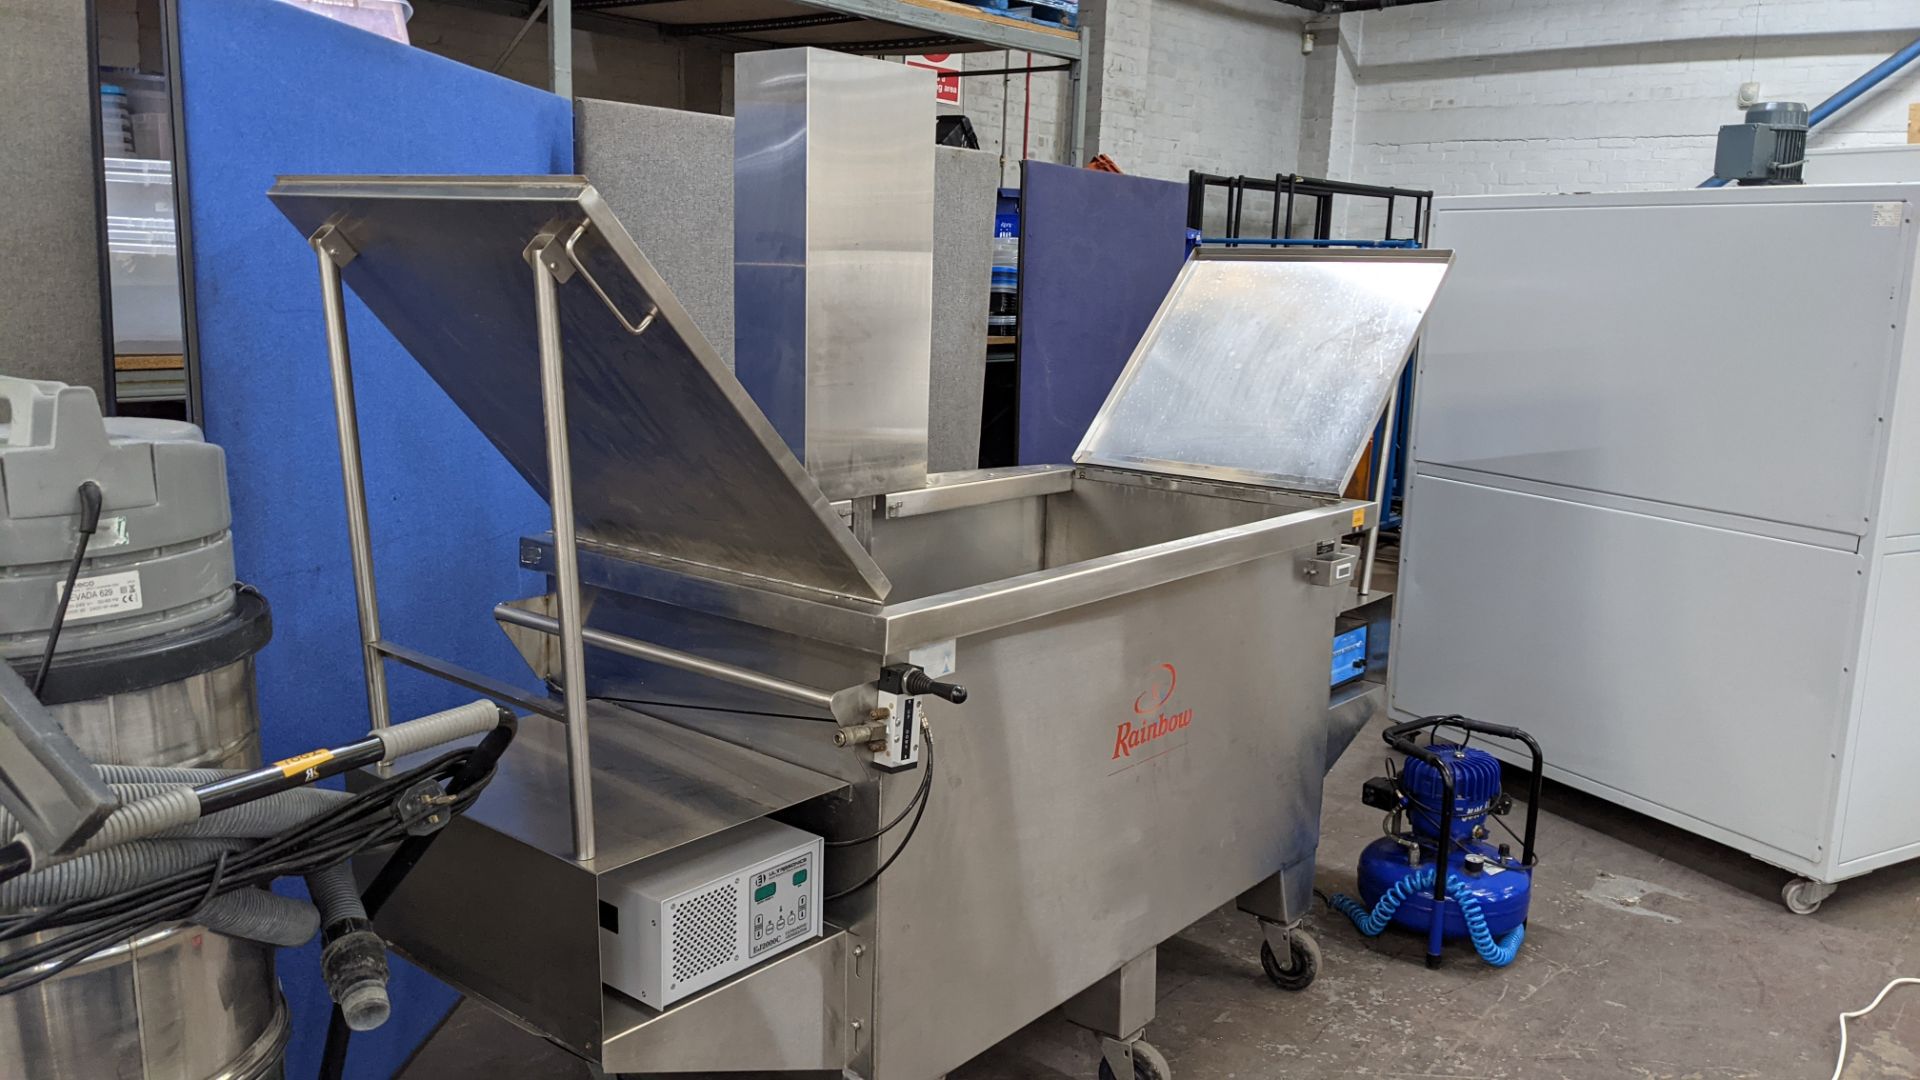 Large Stainless Steel Ultrasonic Cleaning Tank: Morantz Super Mighty One - Image 15 of 25